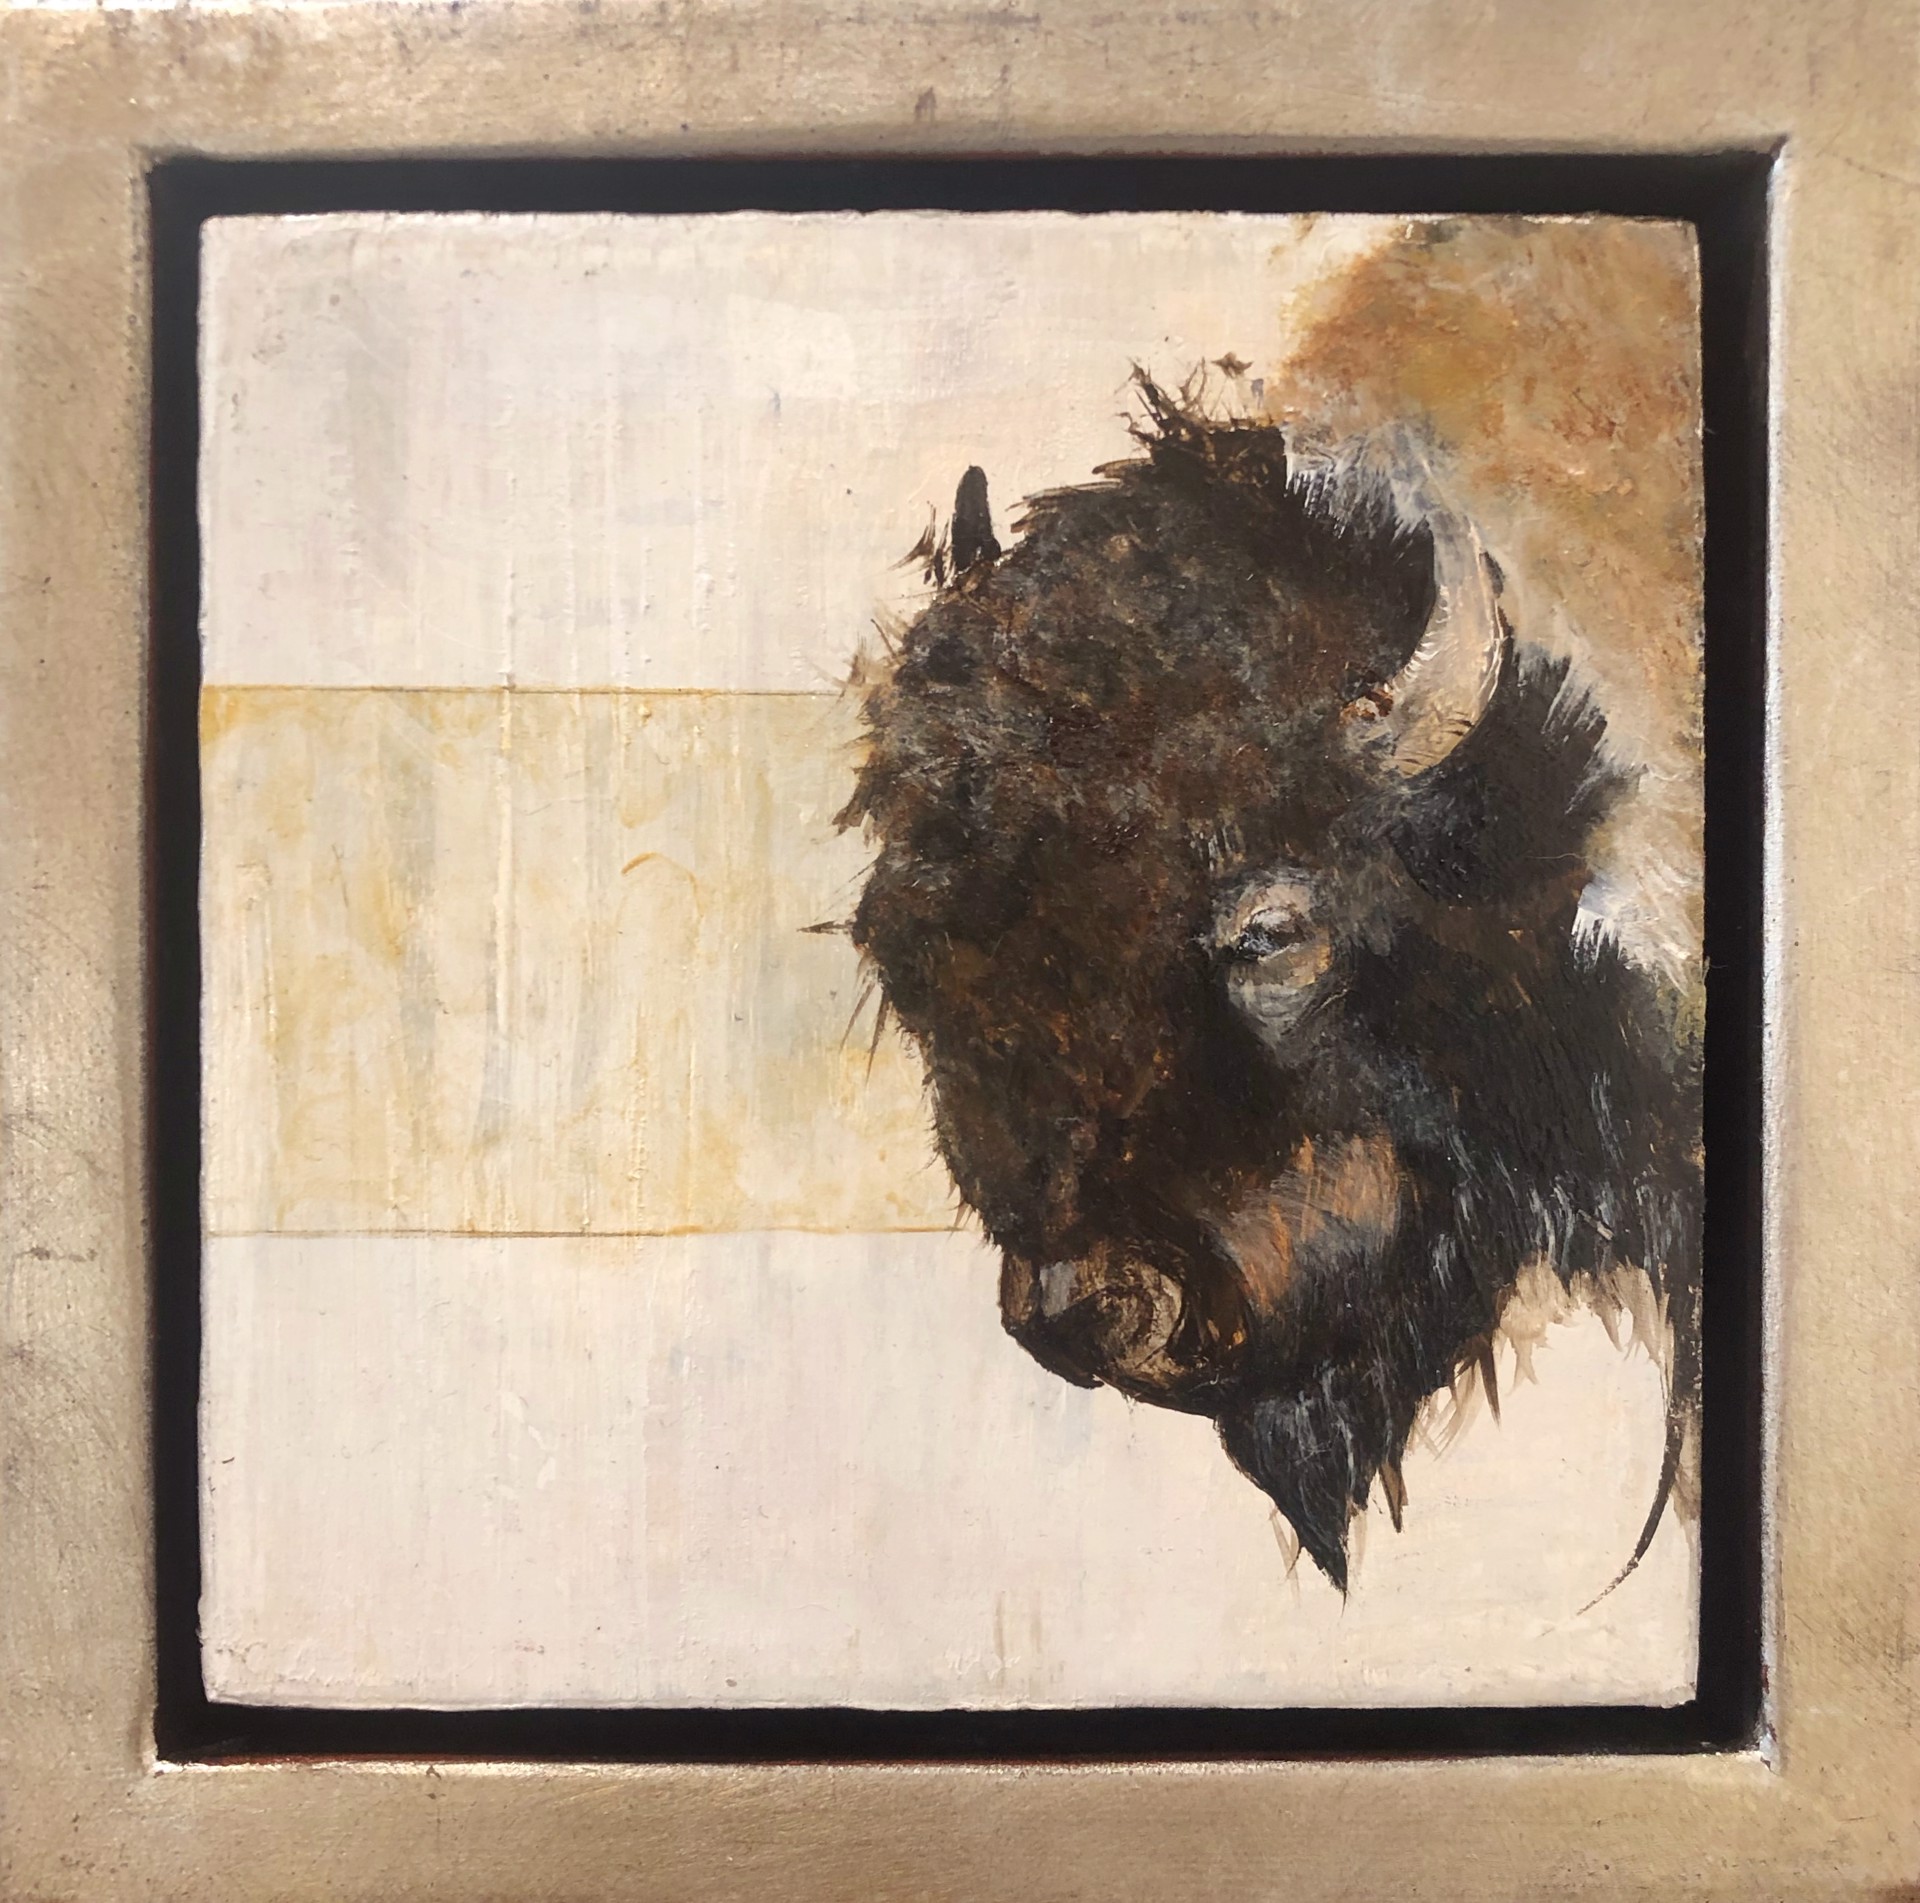 Original Oil painting Of A Bison Or Buffalo Face On A Contemporary Cream And Gold Background With A Warm Gold Silver Frame, By Jenna Von Benedikt